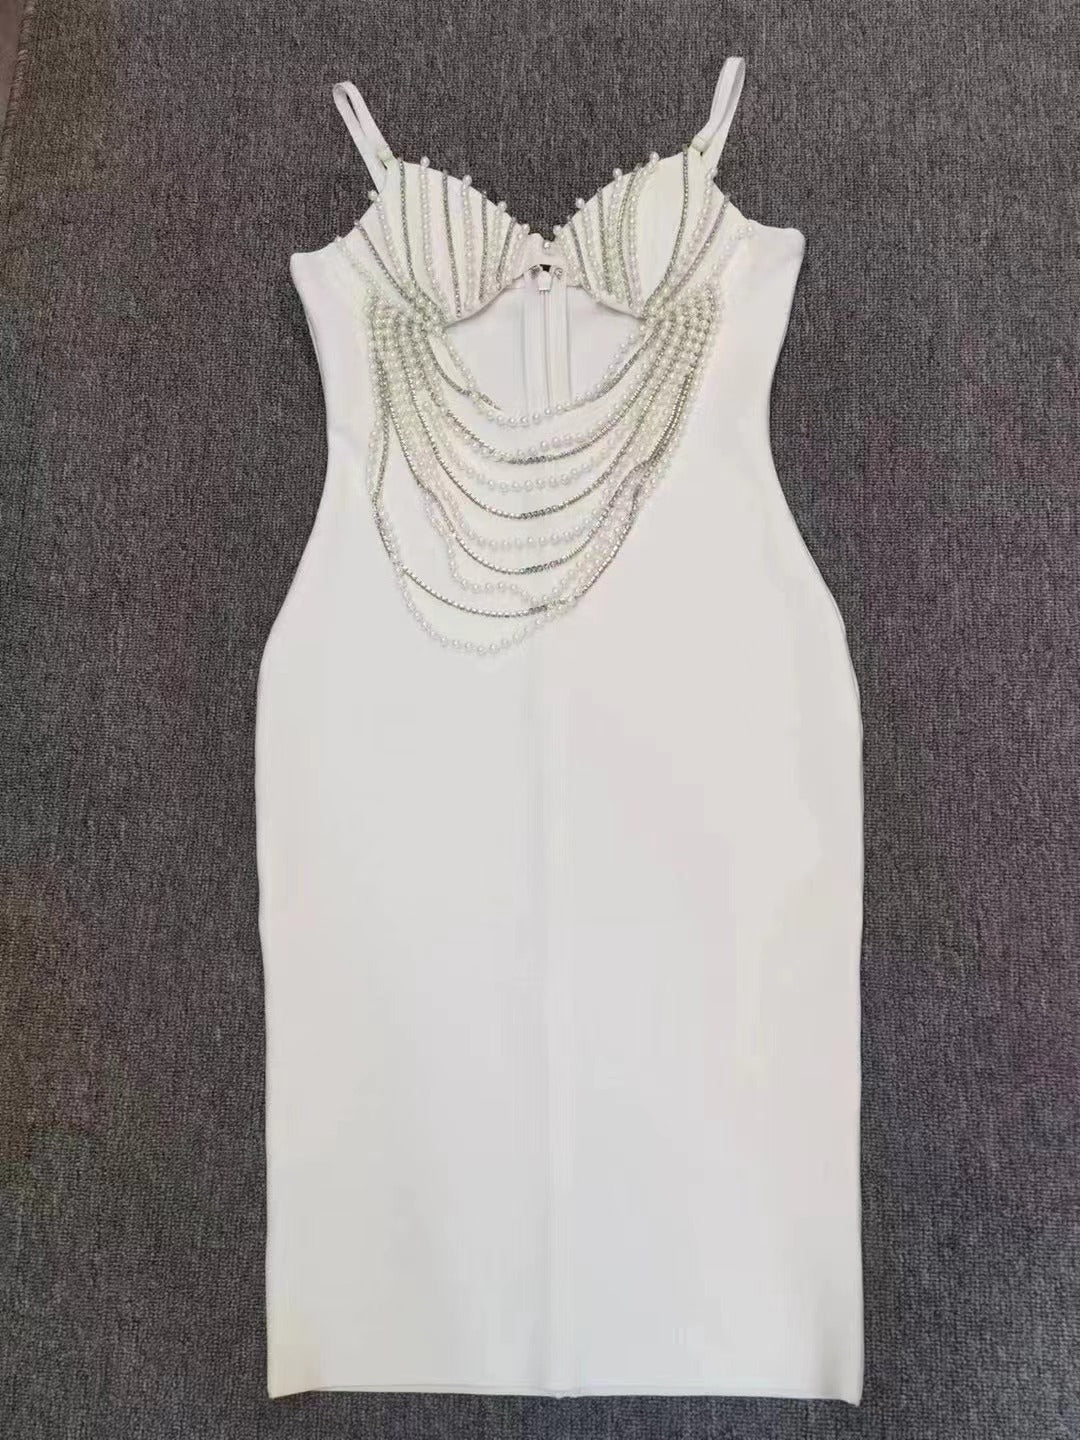 Summer Elegant Beaded Rhinestone Chain V neck Strap Dress White Hollow Out Cutout out Bandage Suspender